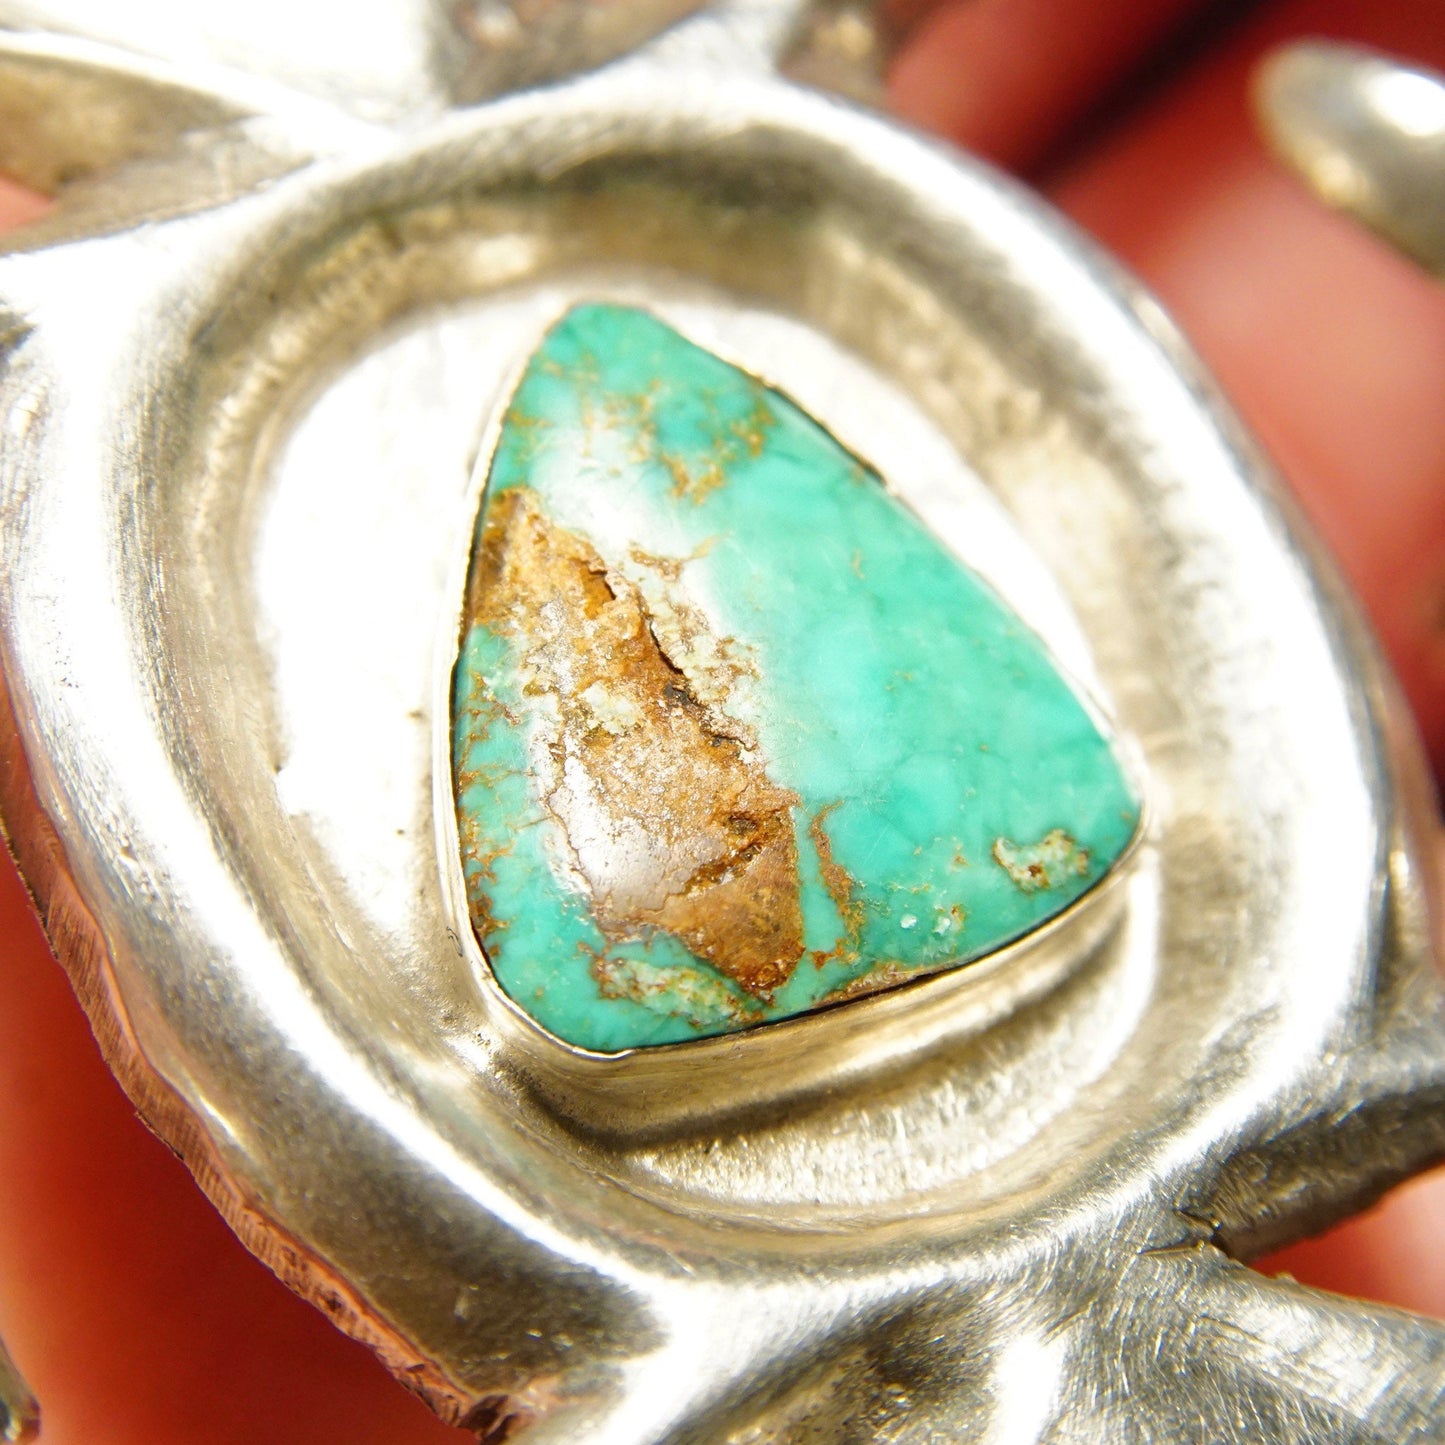 Vintage signed 'Phillip' Native American sterling silver and natural turquoise sand cast belt buckle, measuring 3 1/8 inches wide, featuring a triangular piece of turquoise with brown matrix set in an organically shaped silver bezel with a brushed, textured silver background.